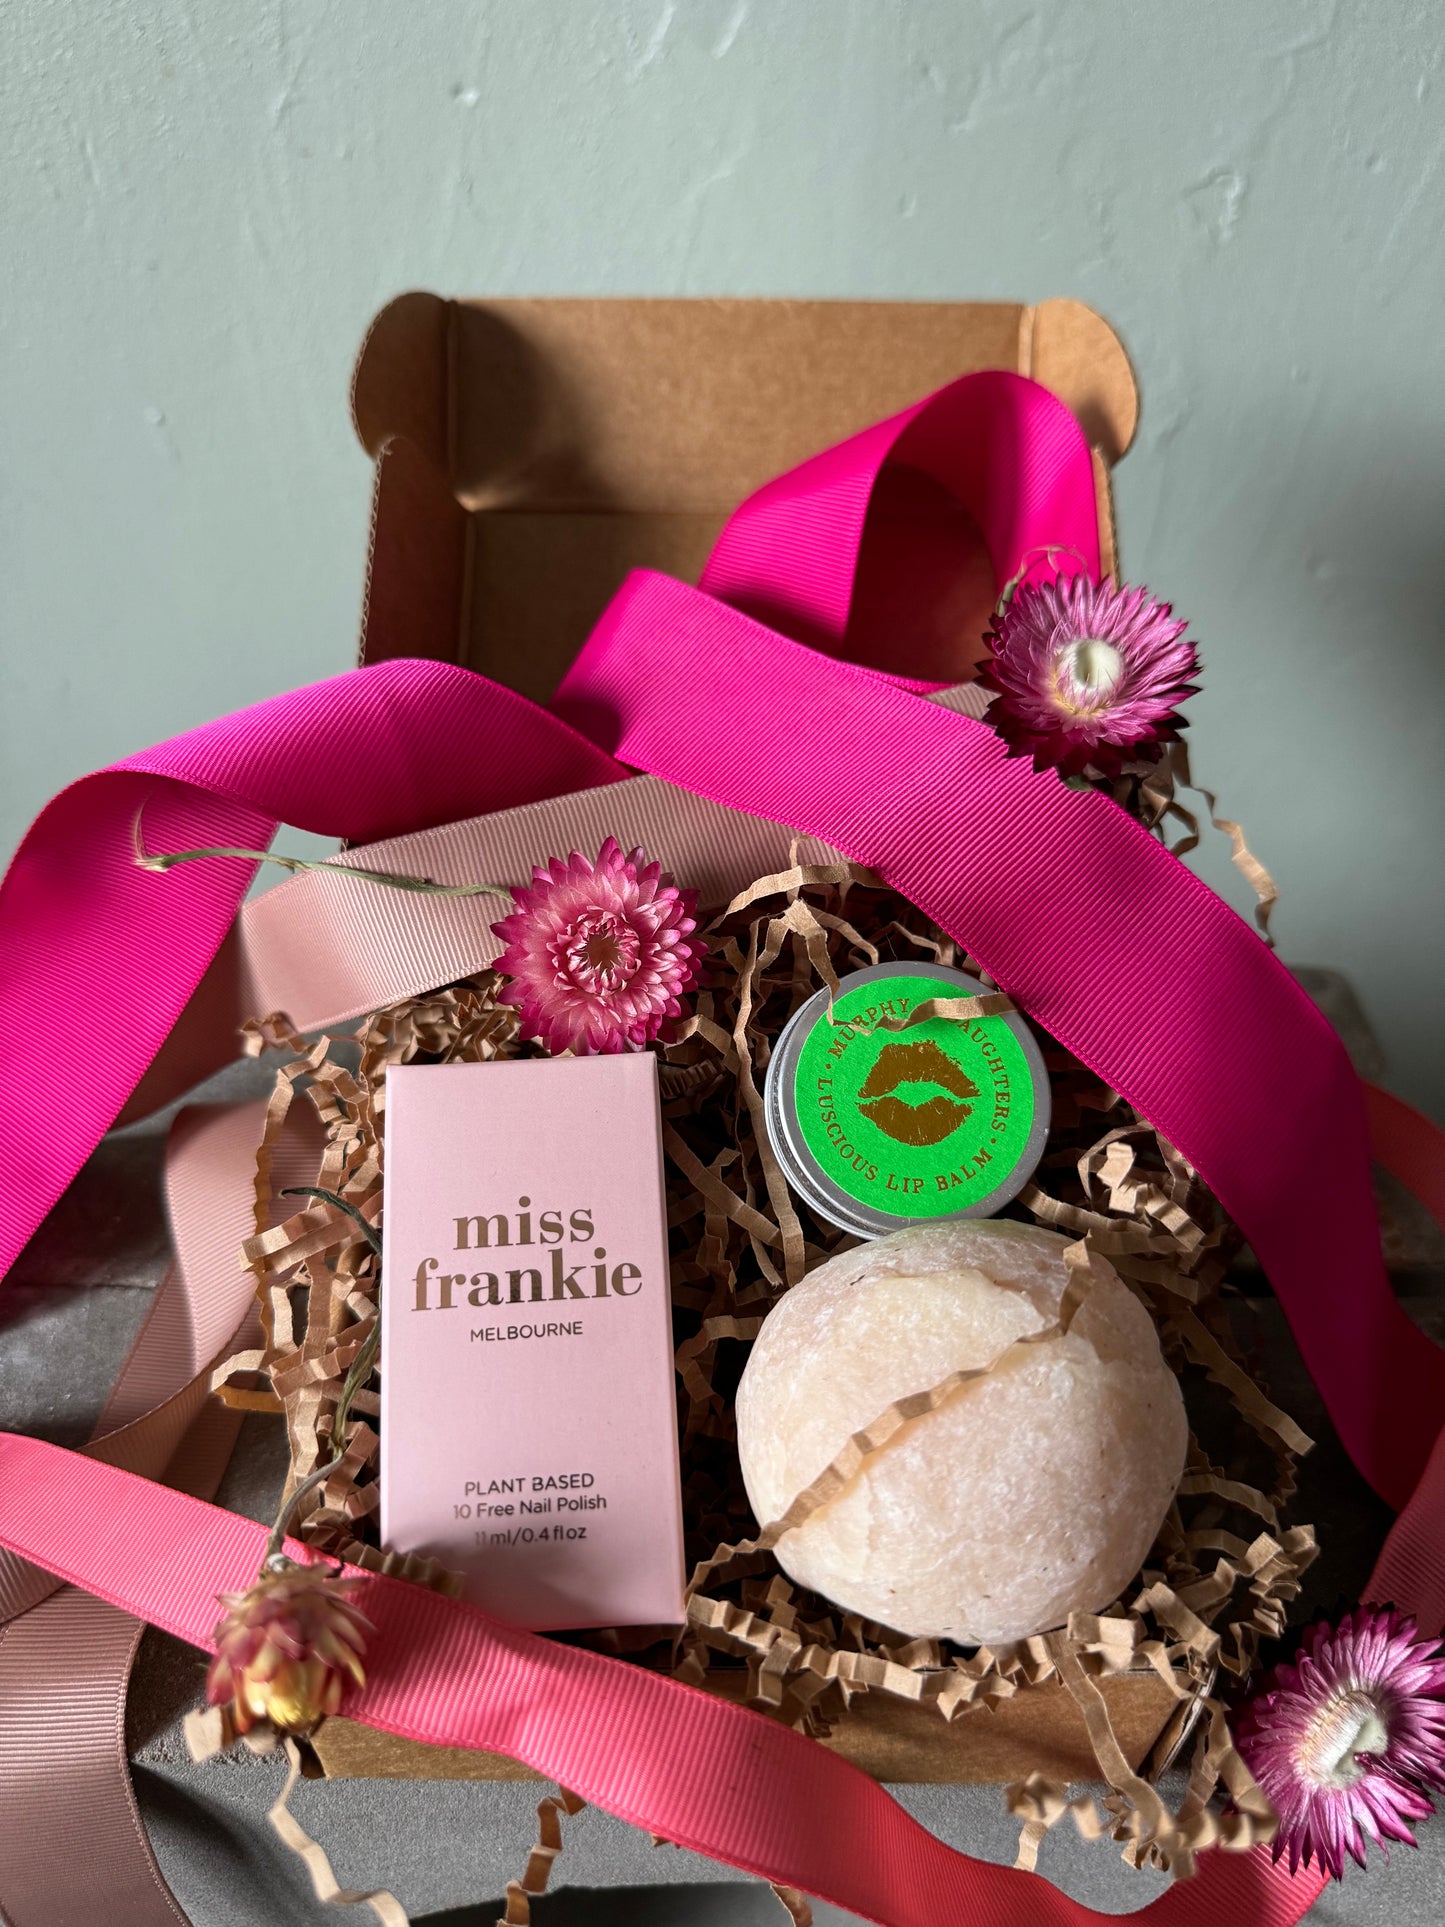 Mother's Day Hampers